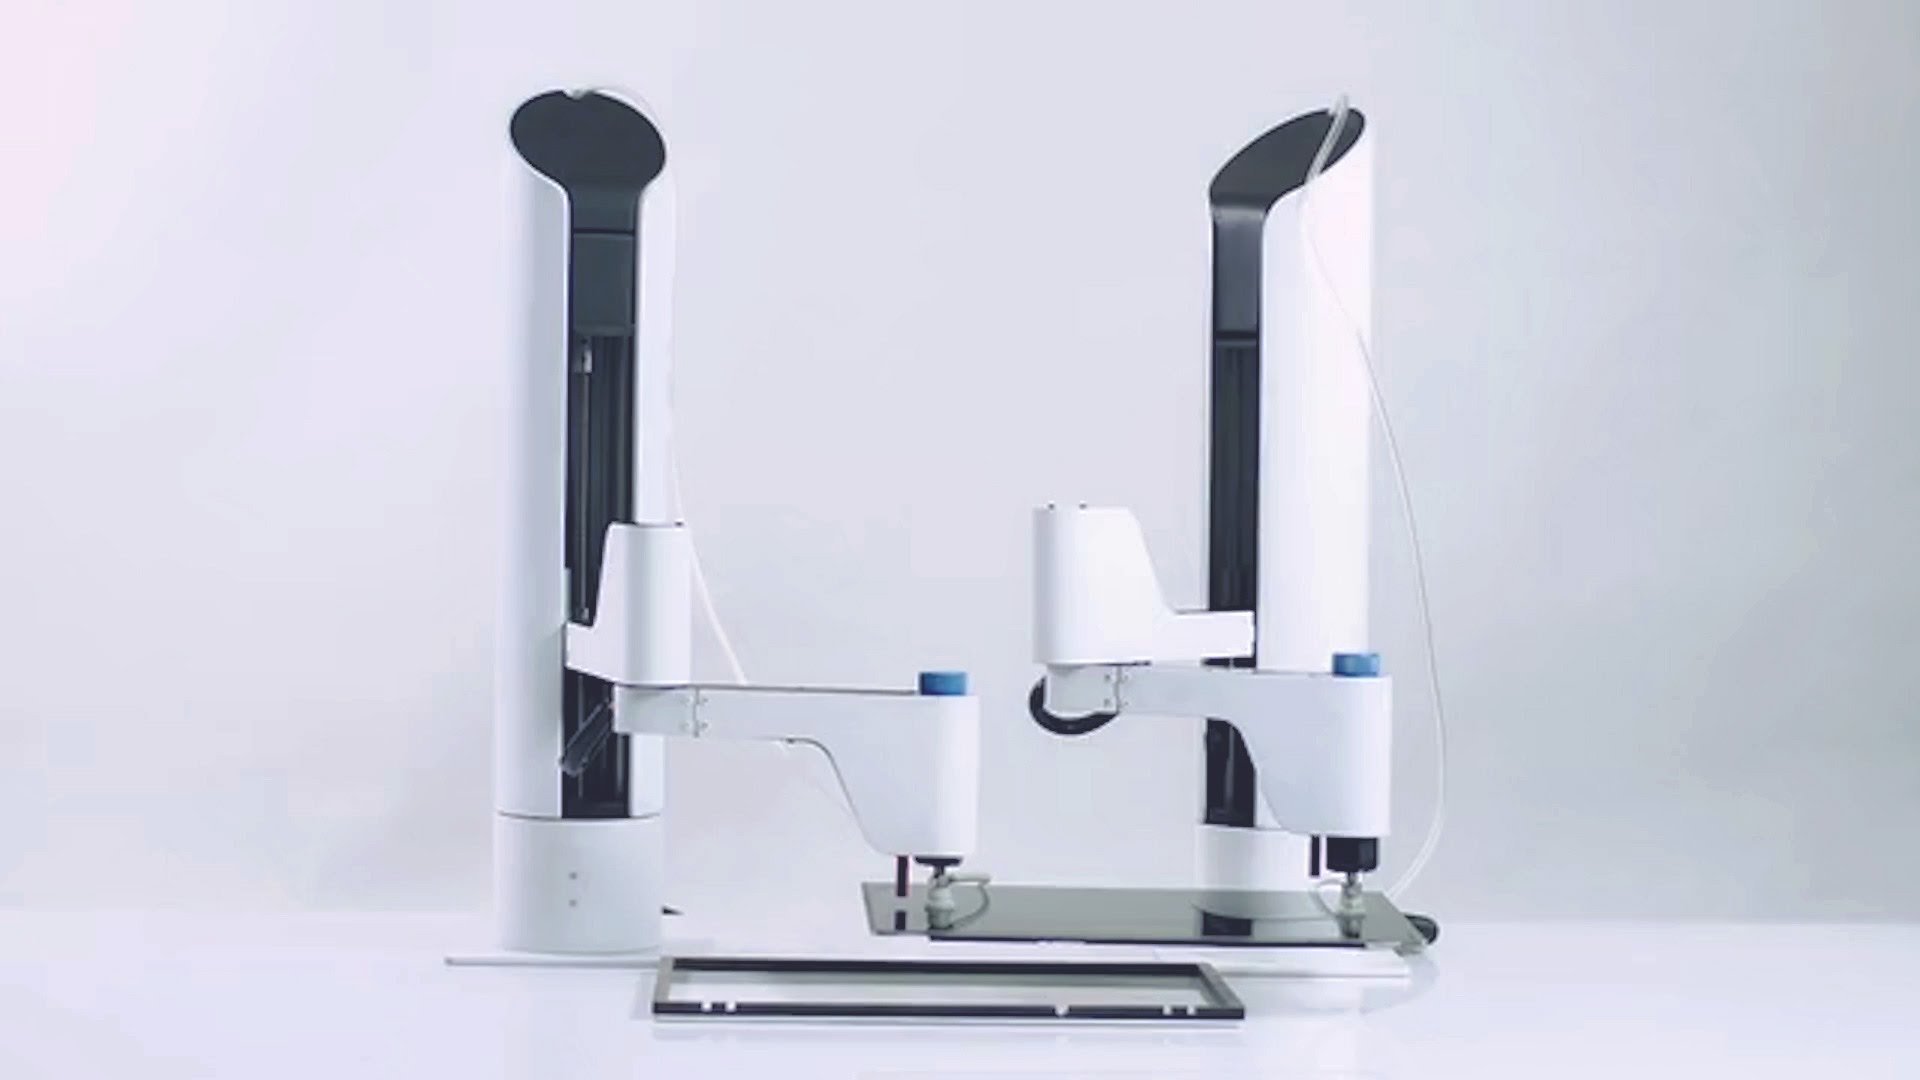 Makerarm: The Robot That Can Make Anything!